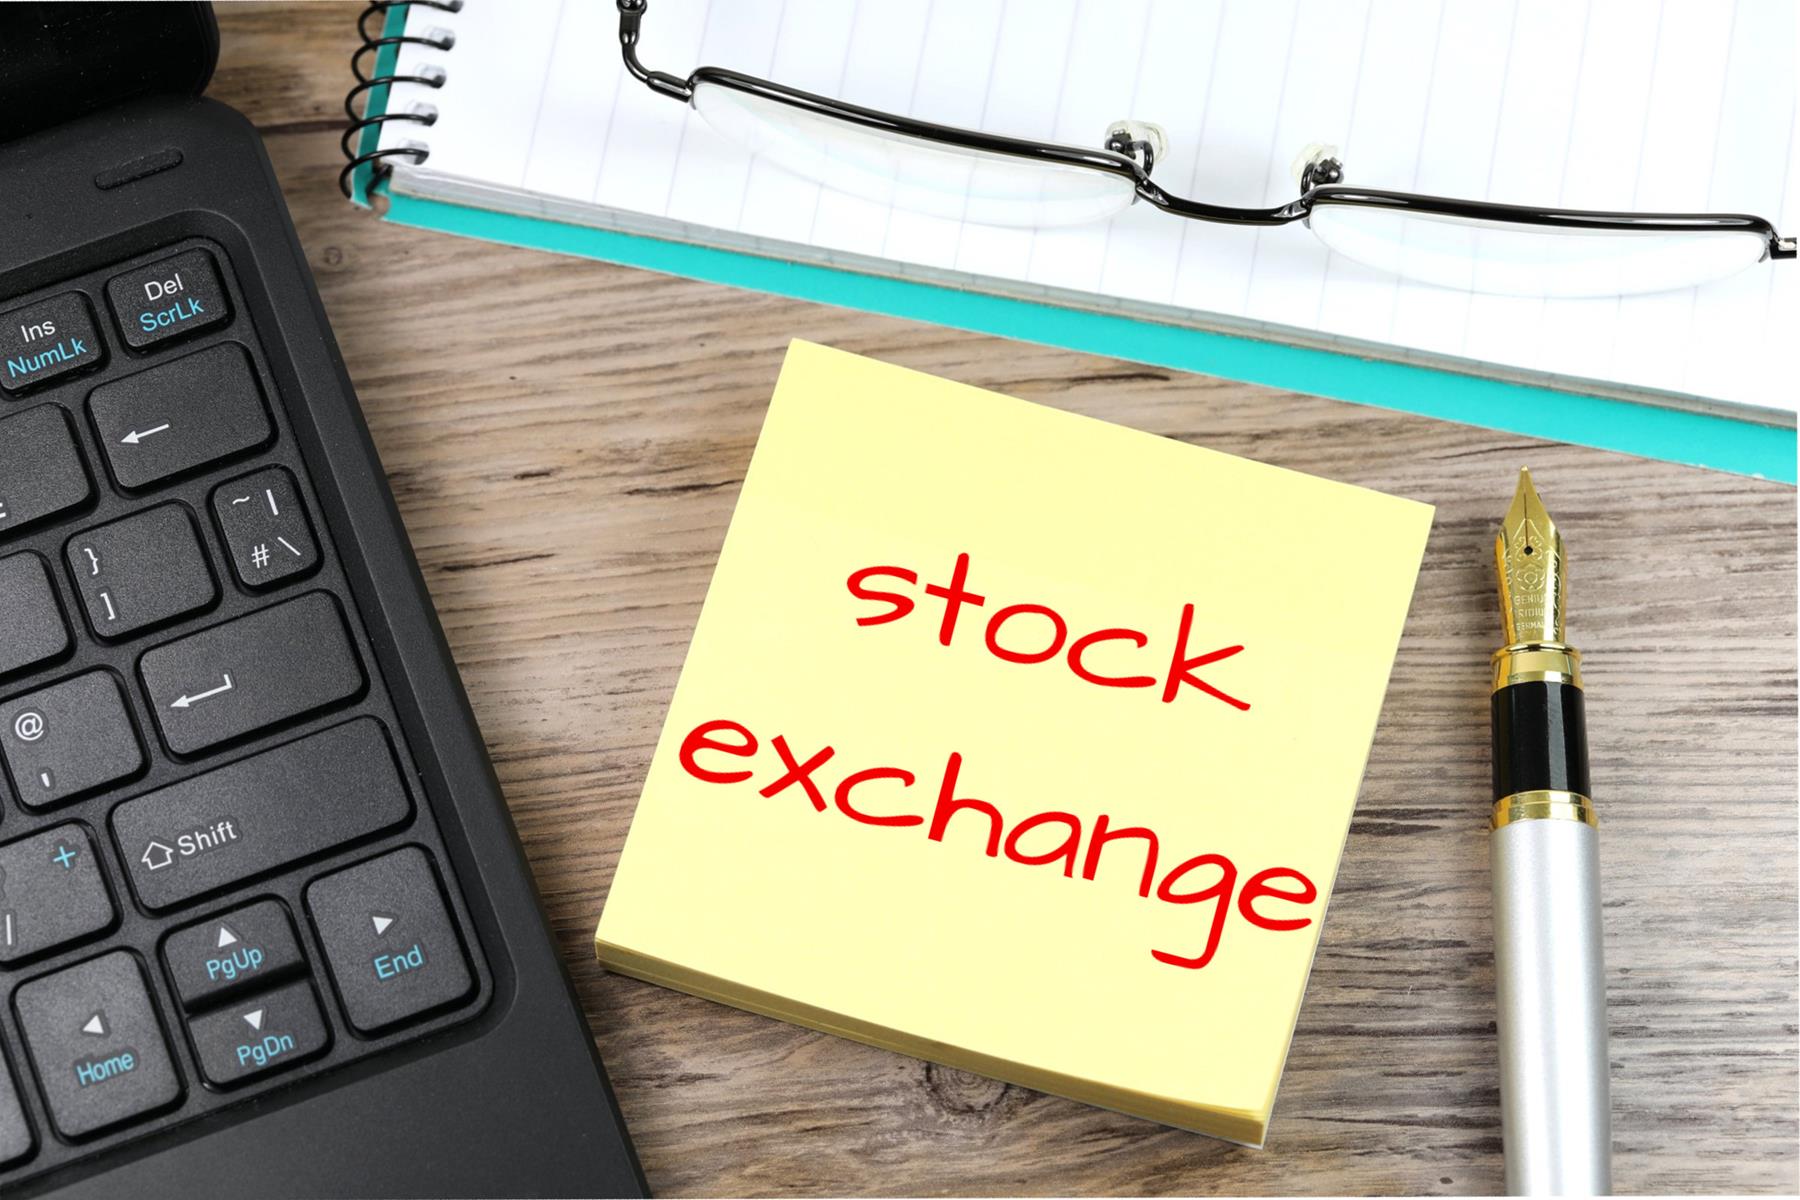 stock-exchange-free-of-charge-creative-commons-post-it-note-image